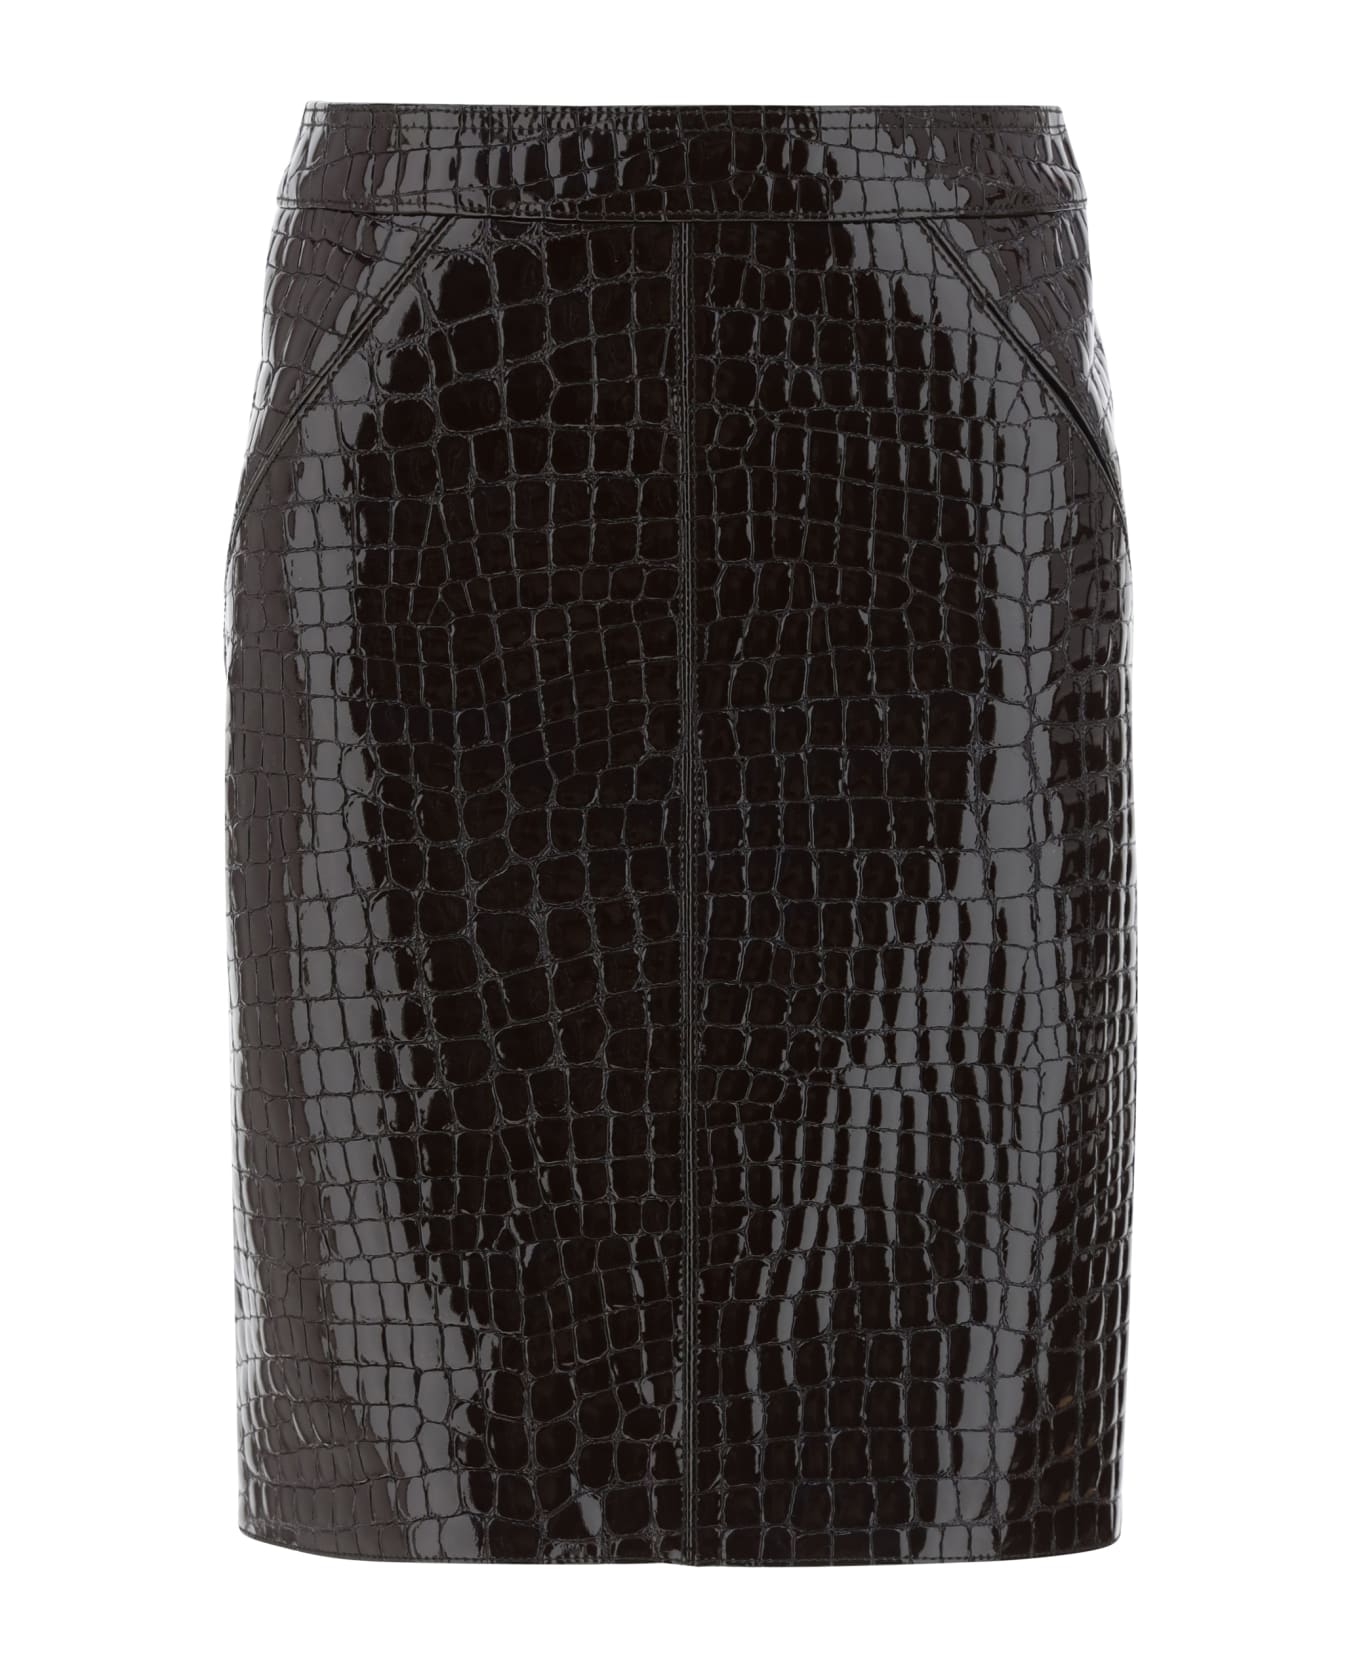 Tom Ford Skirts - Marrone scuro